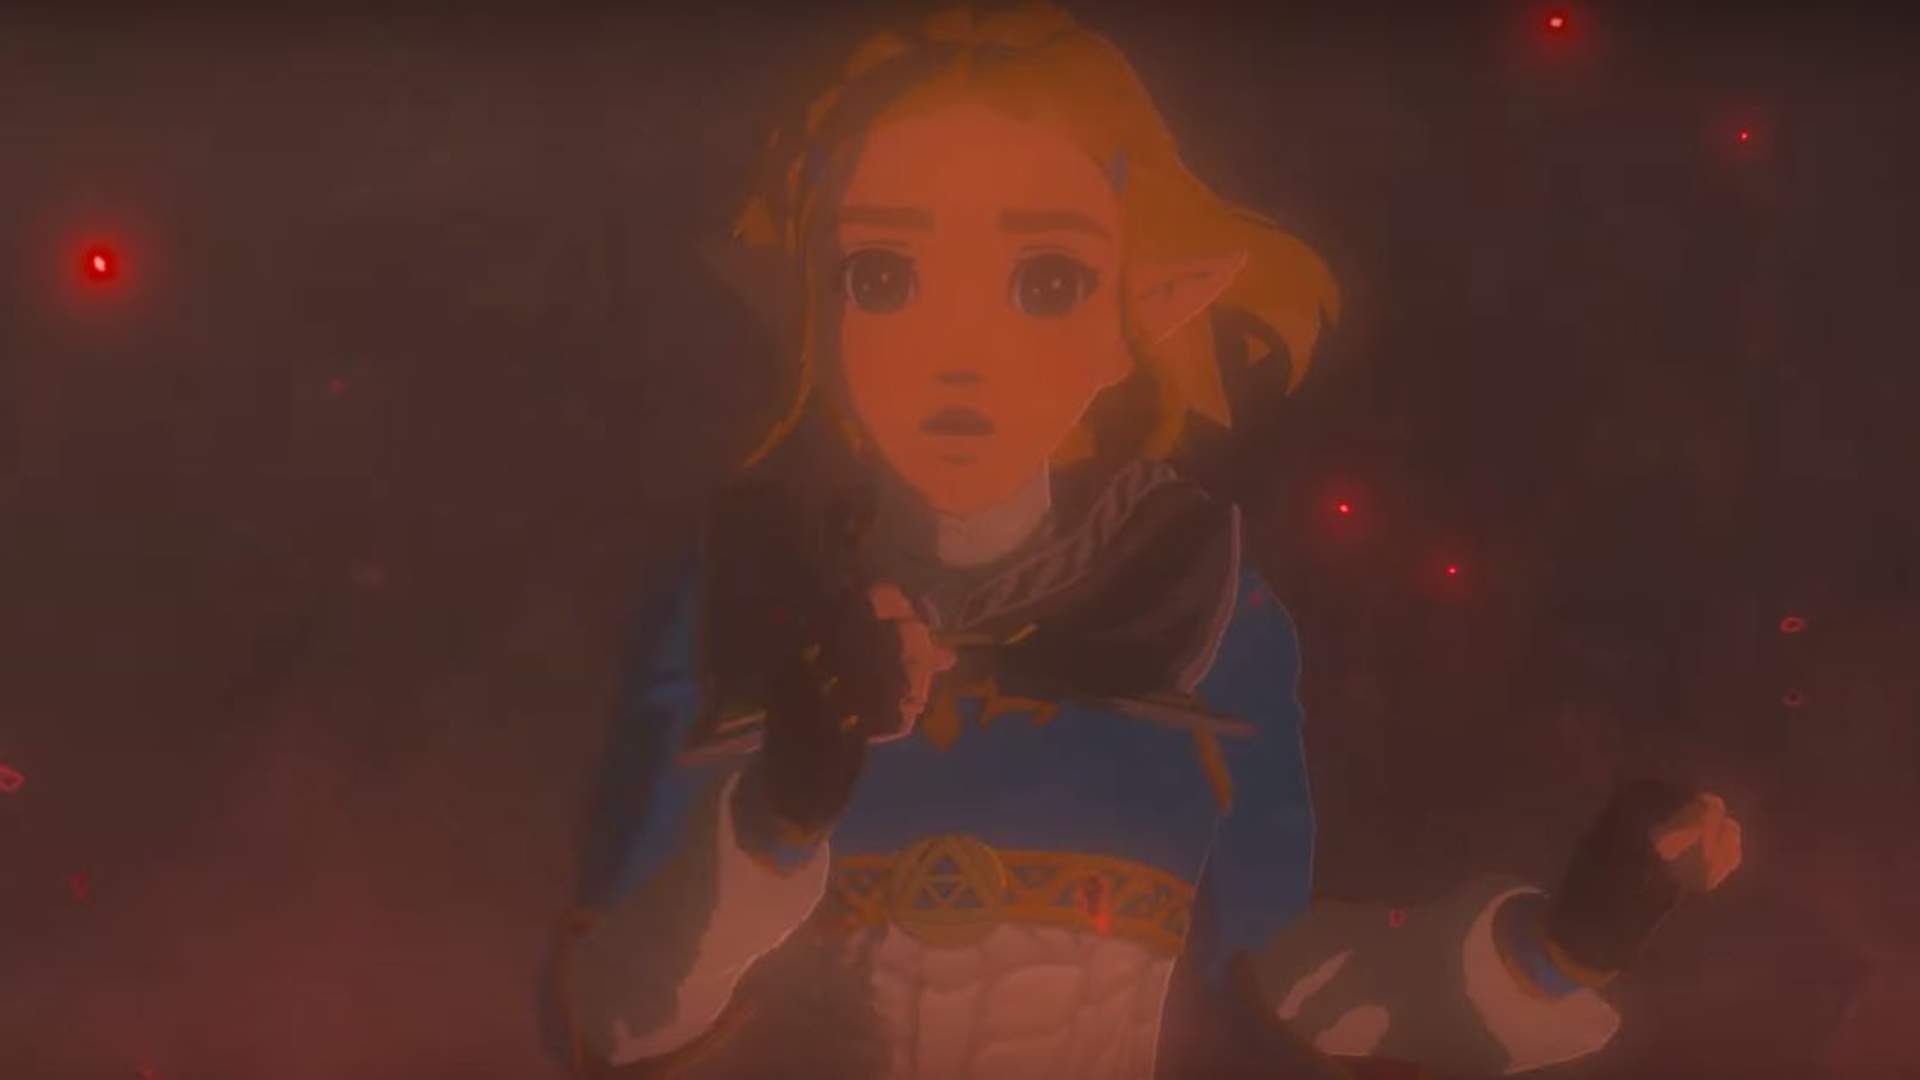 Zelda Breath of the Wild 2 Release Date, Theories, and the Reveal